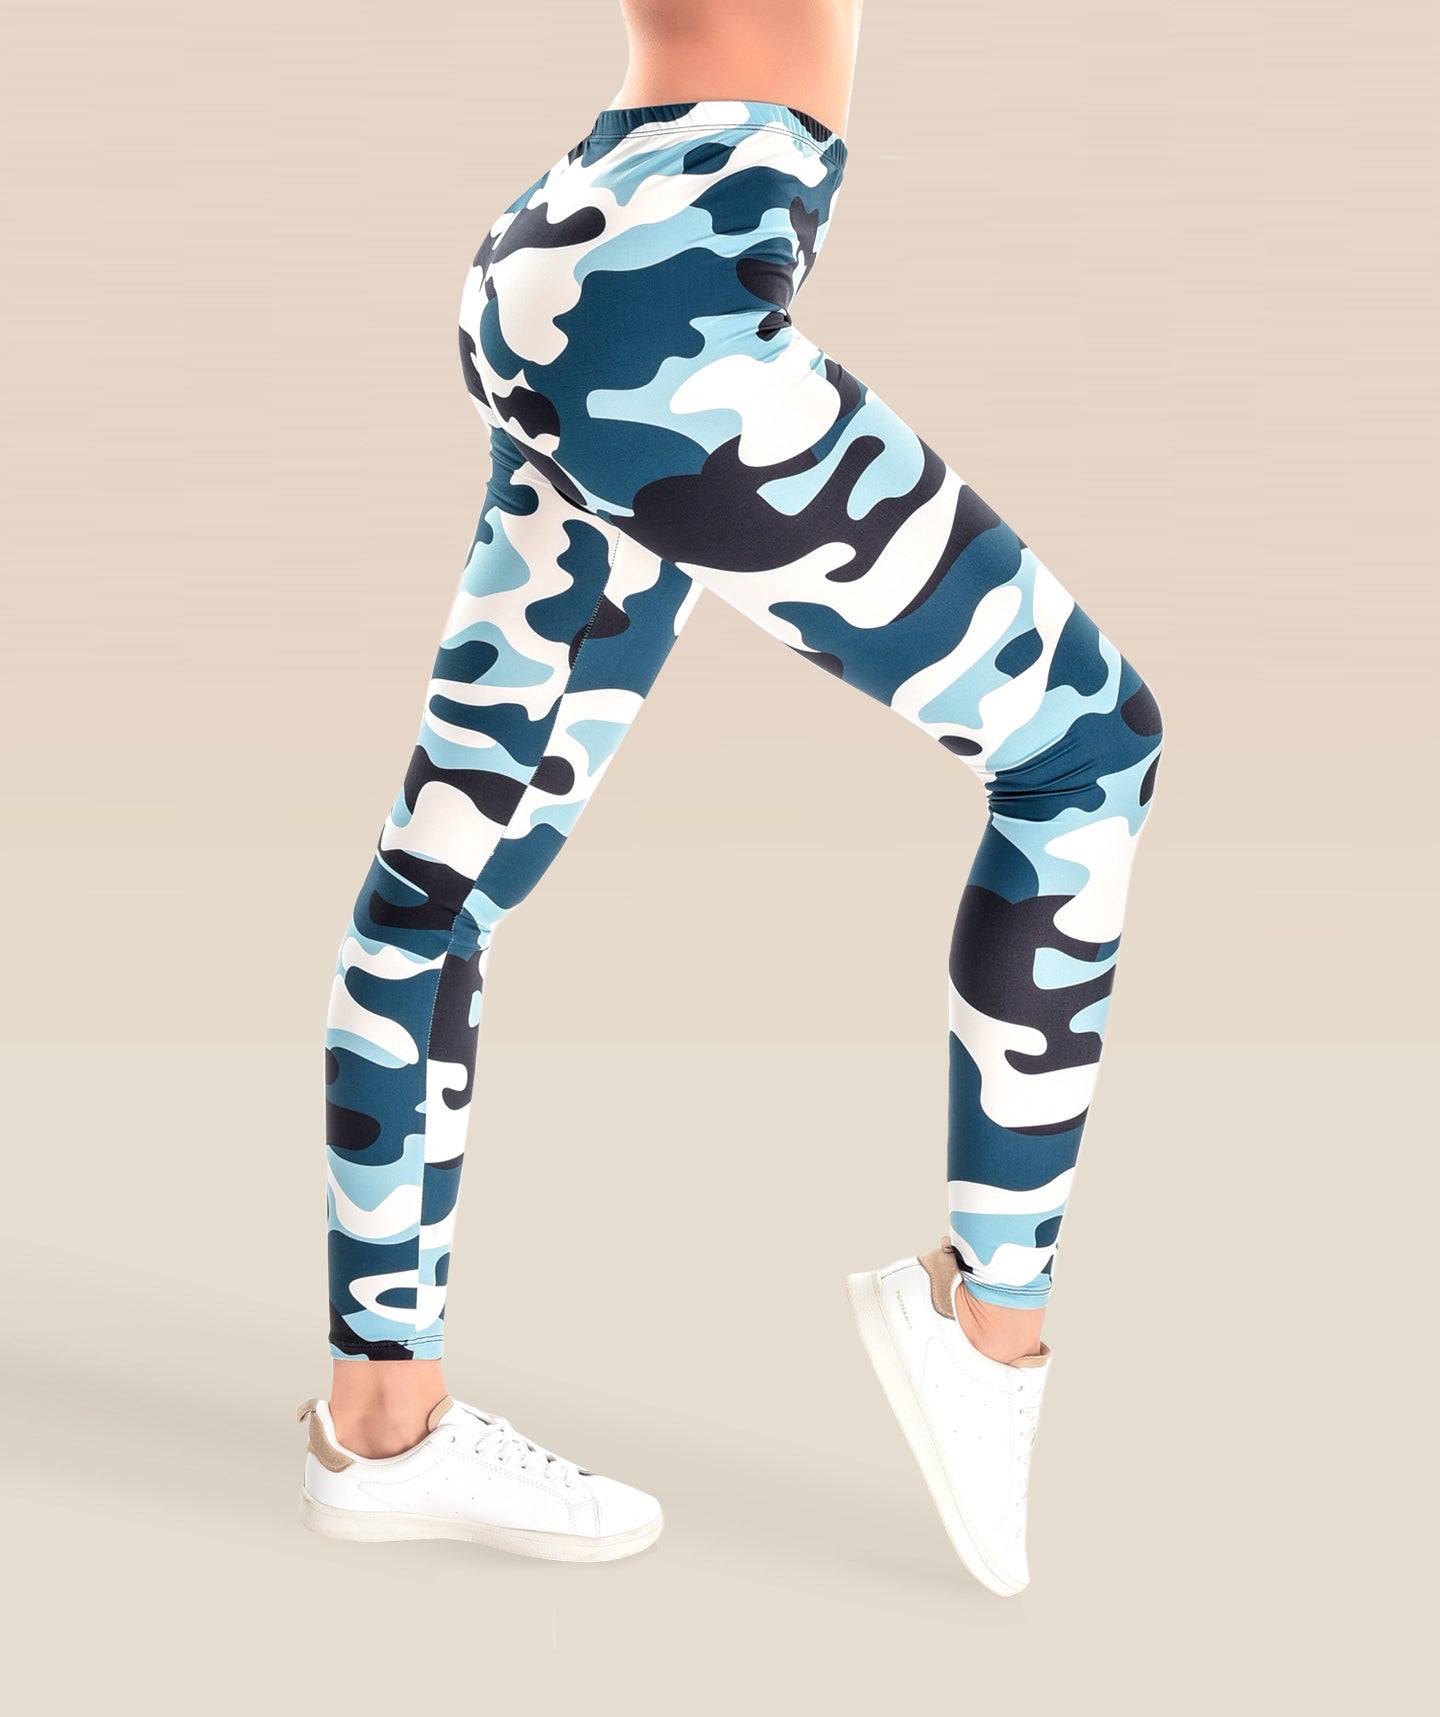 Navy Camouflage Leggings Camo Blue Print – in